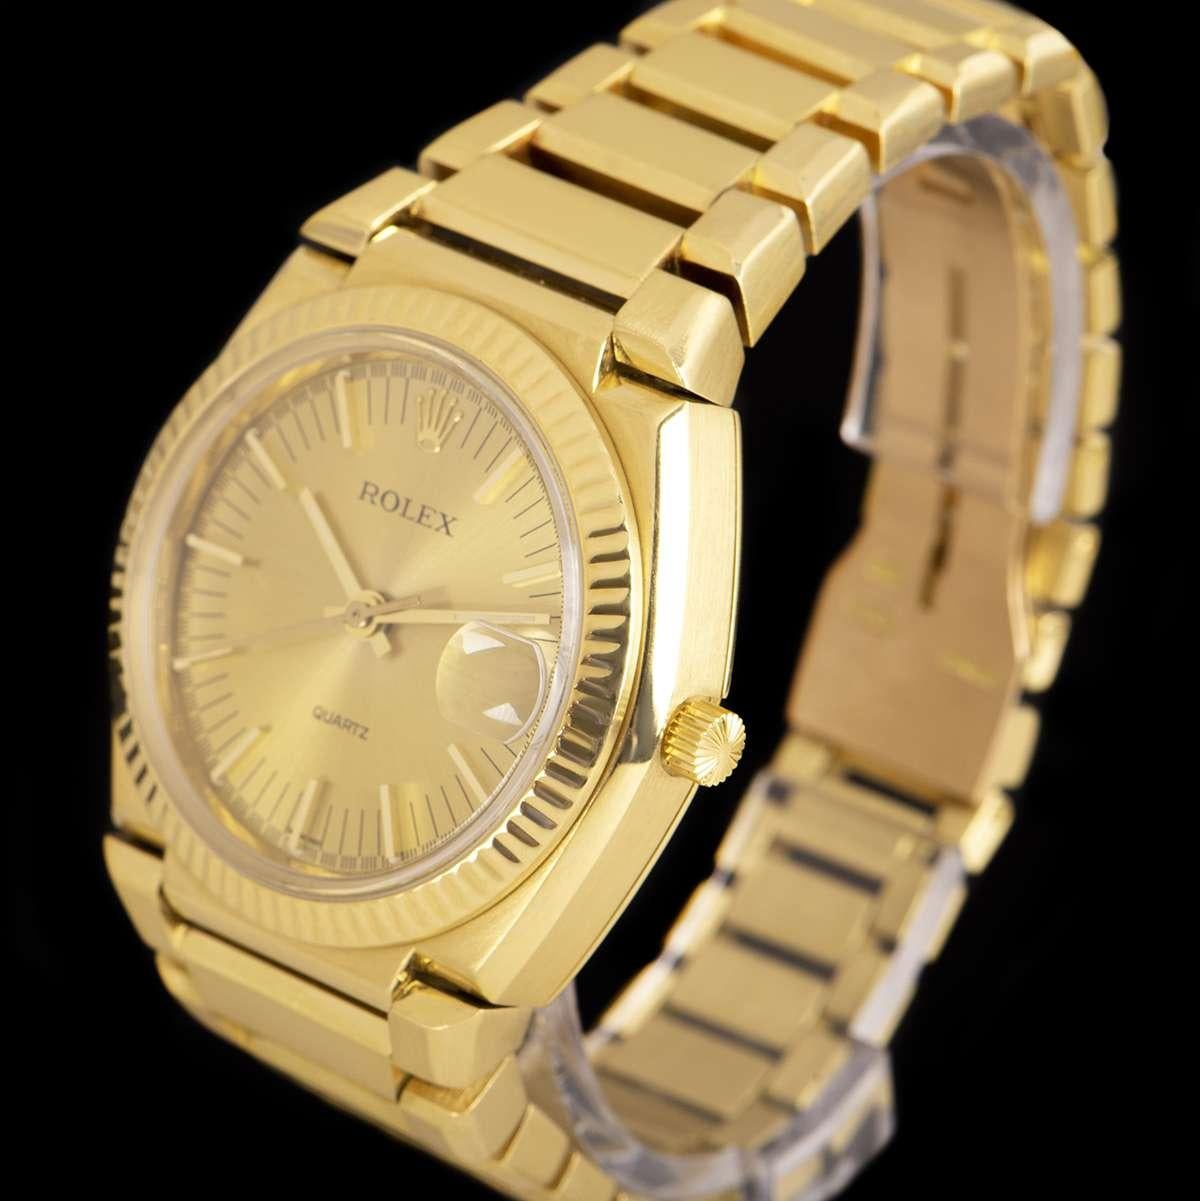 A Very Rare Limited Edition 39 mm 18k Yellow Gold Texan Beta 21 Vintage Gents Wristwatch, champagne dial with applied hour markers, date at 3 0'clock, centre sweeping seconds hand, a fixed 18k yellow gold fluted bezel, an 18k yellow gold integrated